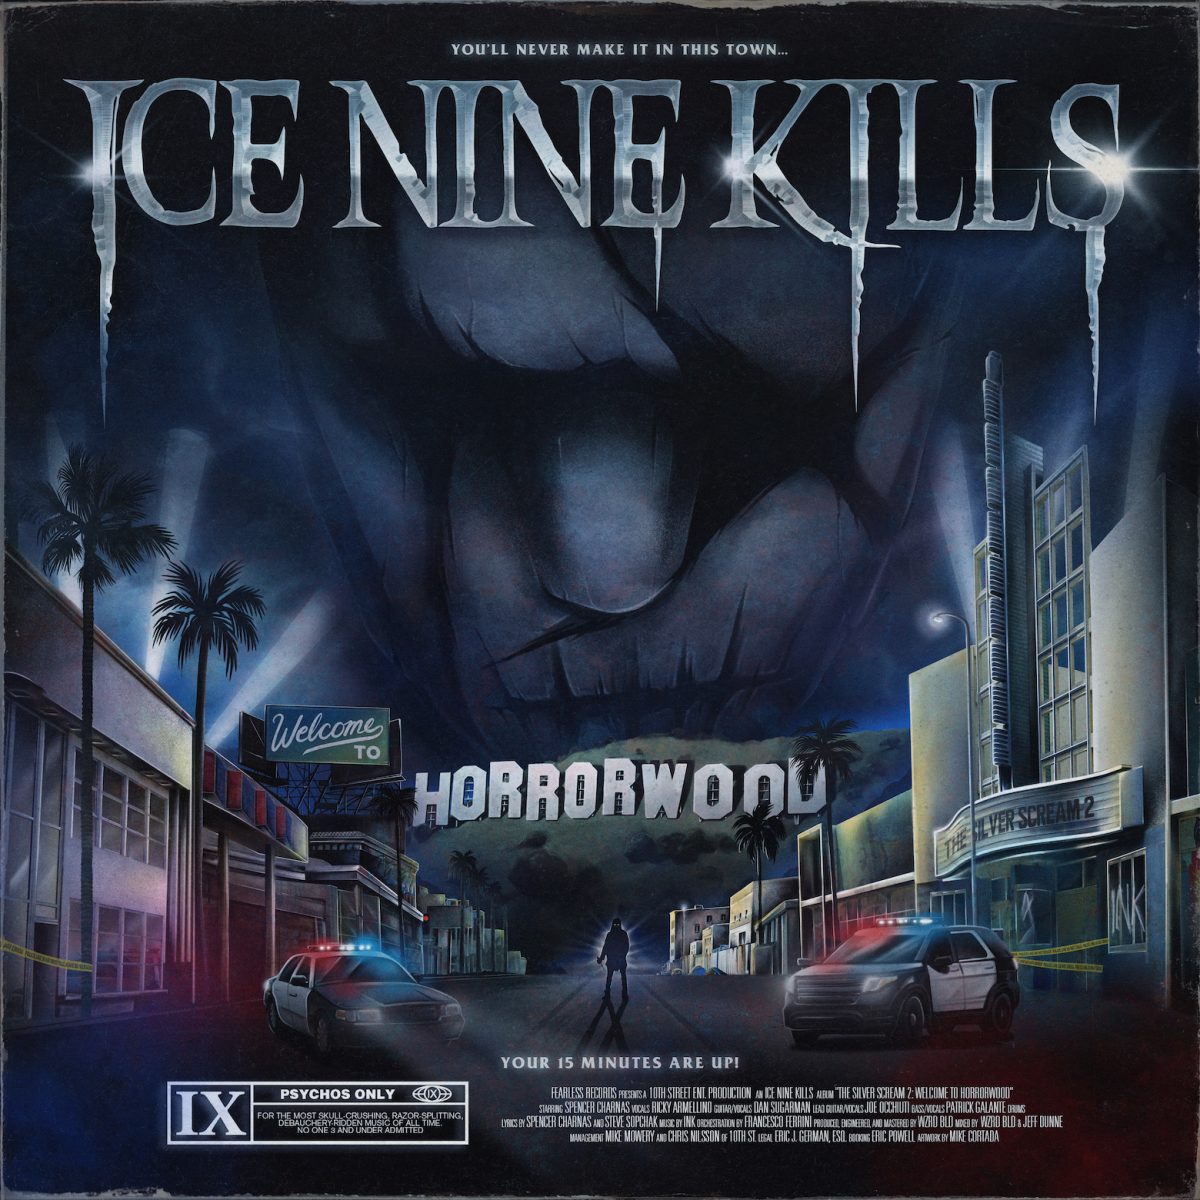 ice-nine-kills-welcome-to-horrorwood-the-silver-scream-2-album-review